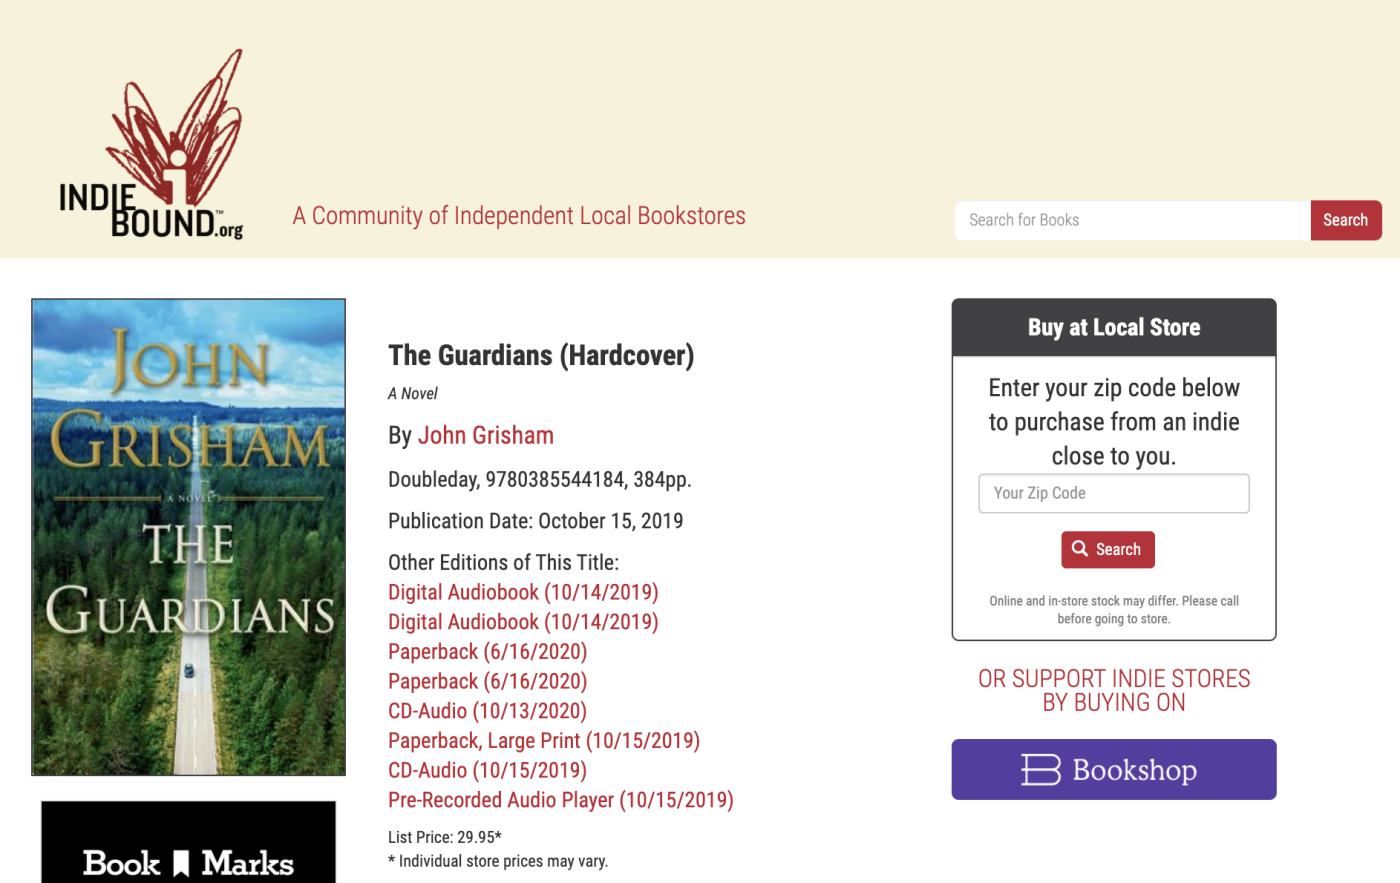 screenshot of indie bookstore selling The Guardians by John Grisham